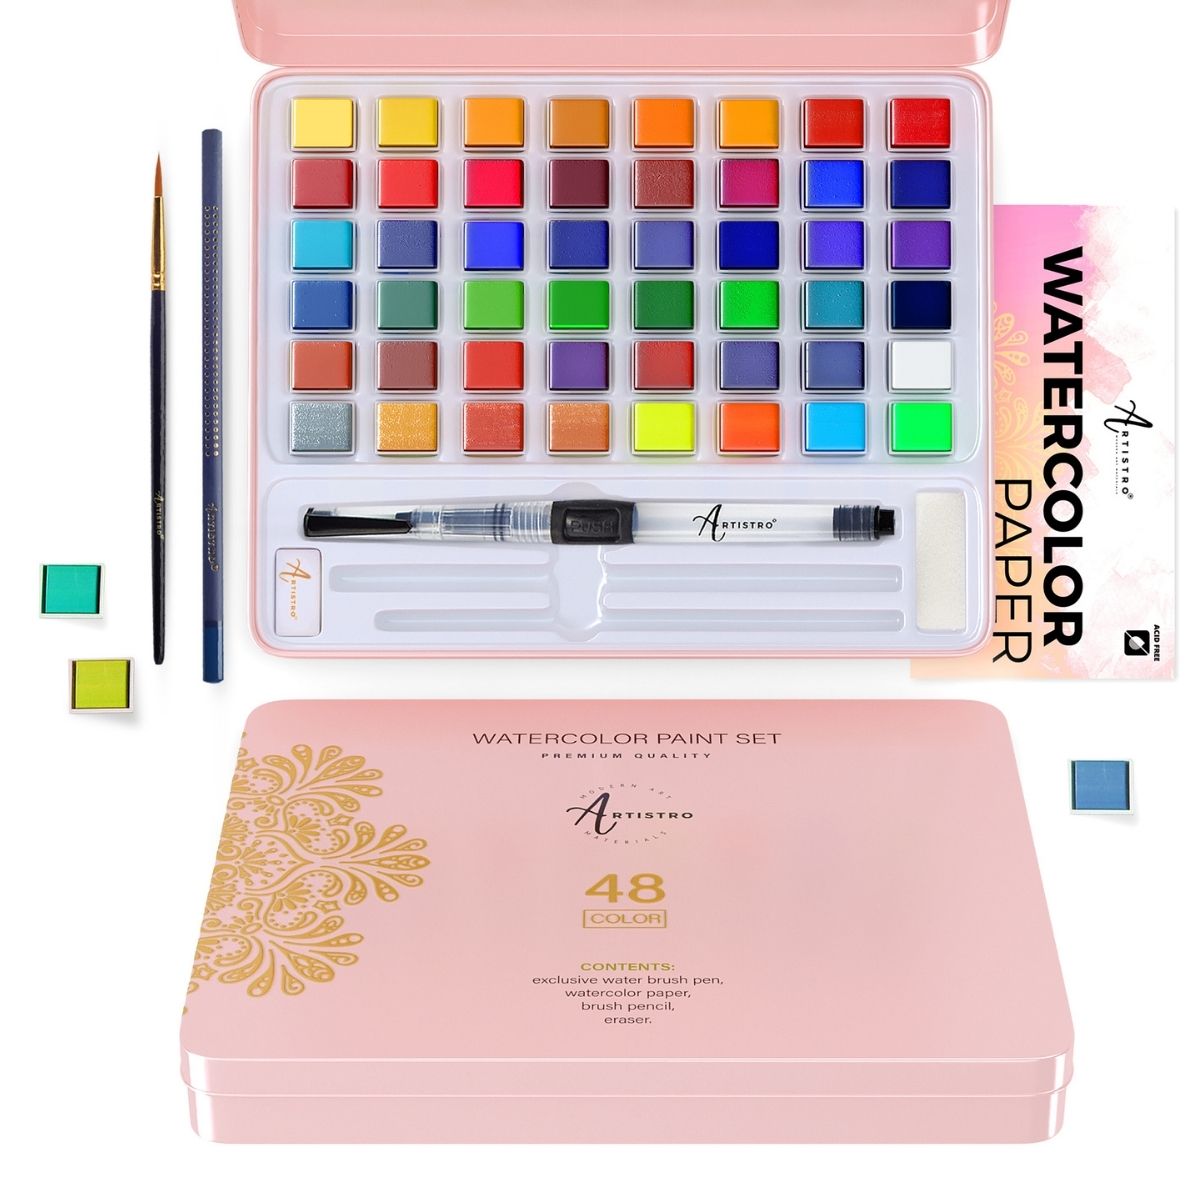 WOOCOLOR Watercolor Paint Set, 50 Colors with Brushes, Watercolor Palette,  Sponges, Travel Watercolors Kit for Adults, Kids and Beginners, Art